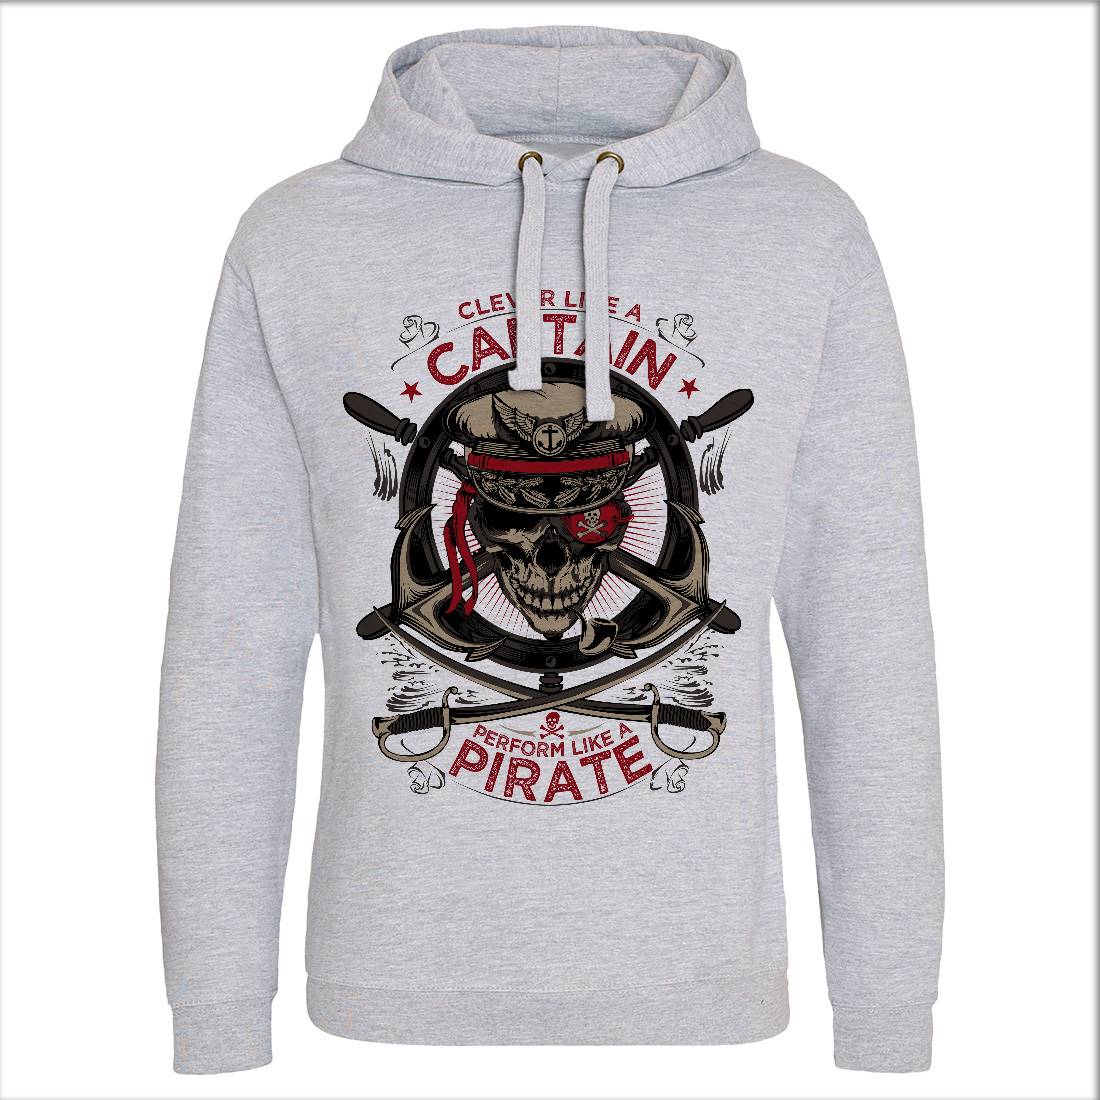 Captain Pirate Mens Hoodie Without Pocket Navy D018